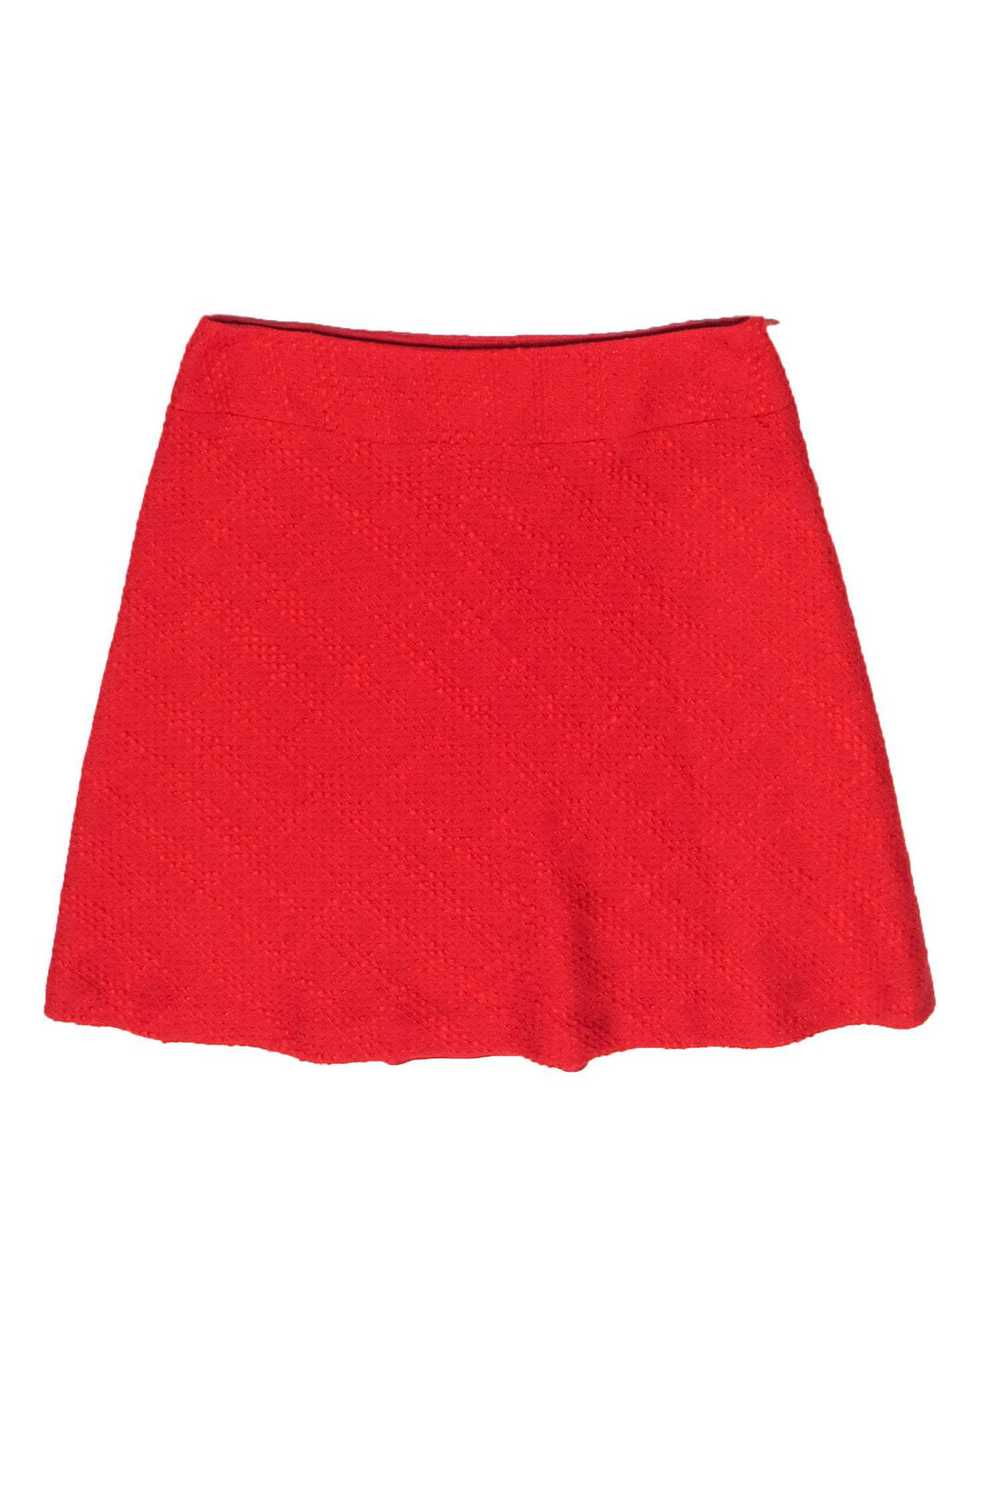 Sara Campbell - Red Tweed A-Line Skirt Sz 10 - image 1